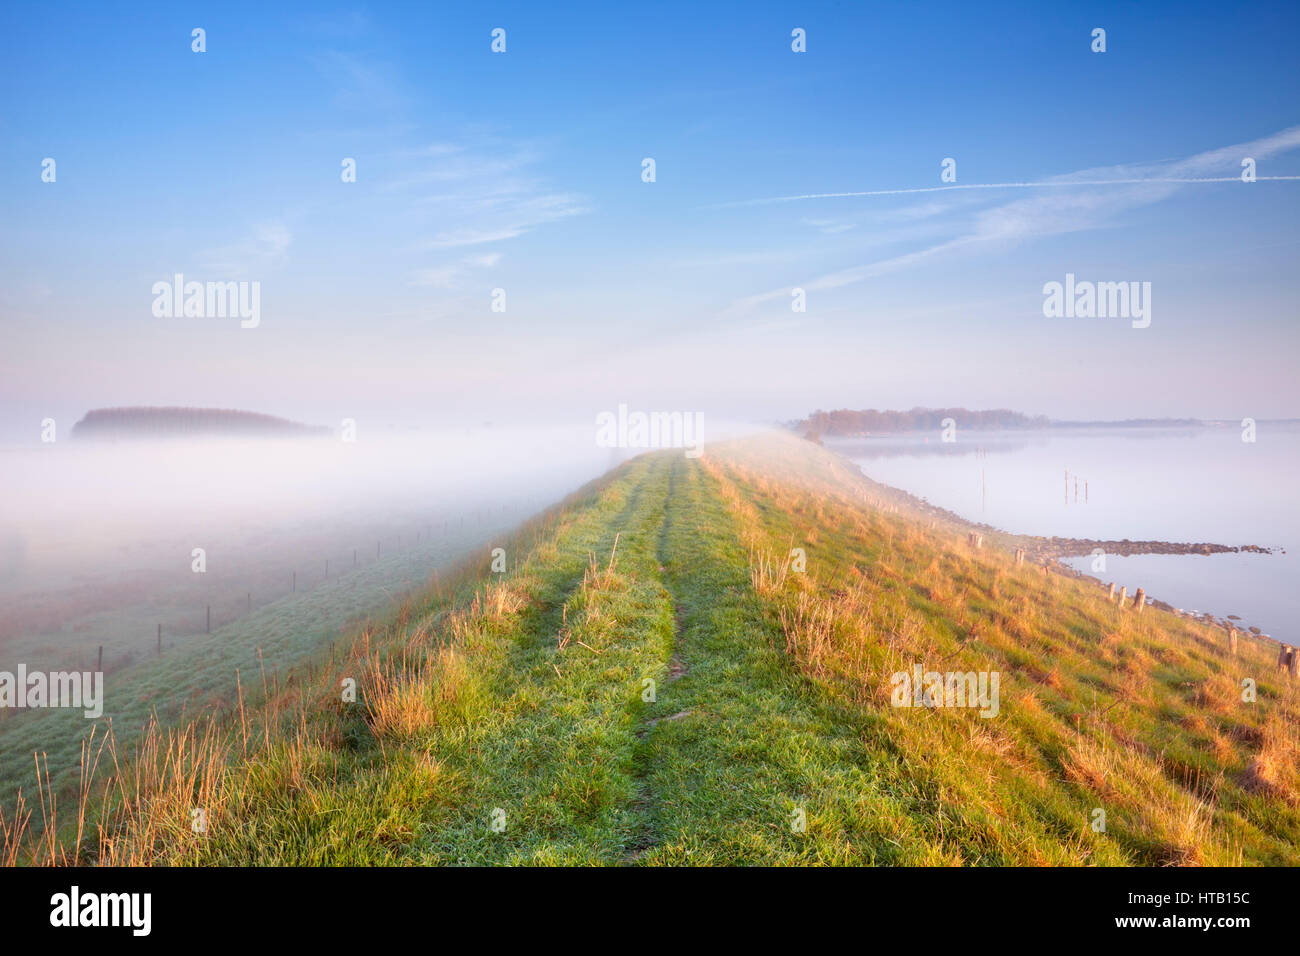 A typical Dutch polder landscape with a dike along a lake. Photographed at the Veerse Meer in the province of Zeeland on a foggy morning. Stock Photo